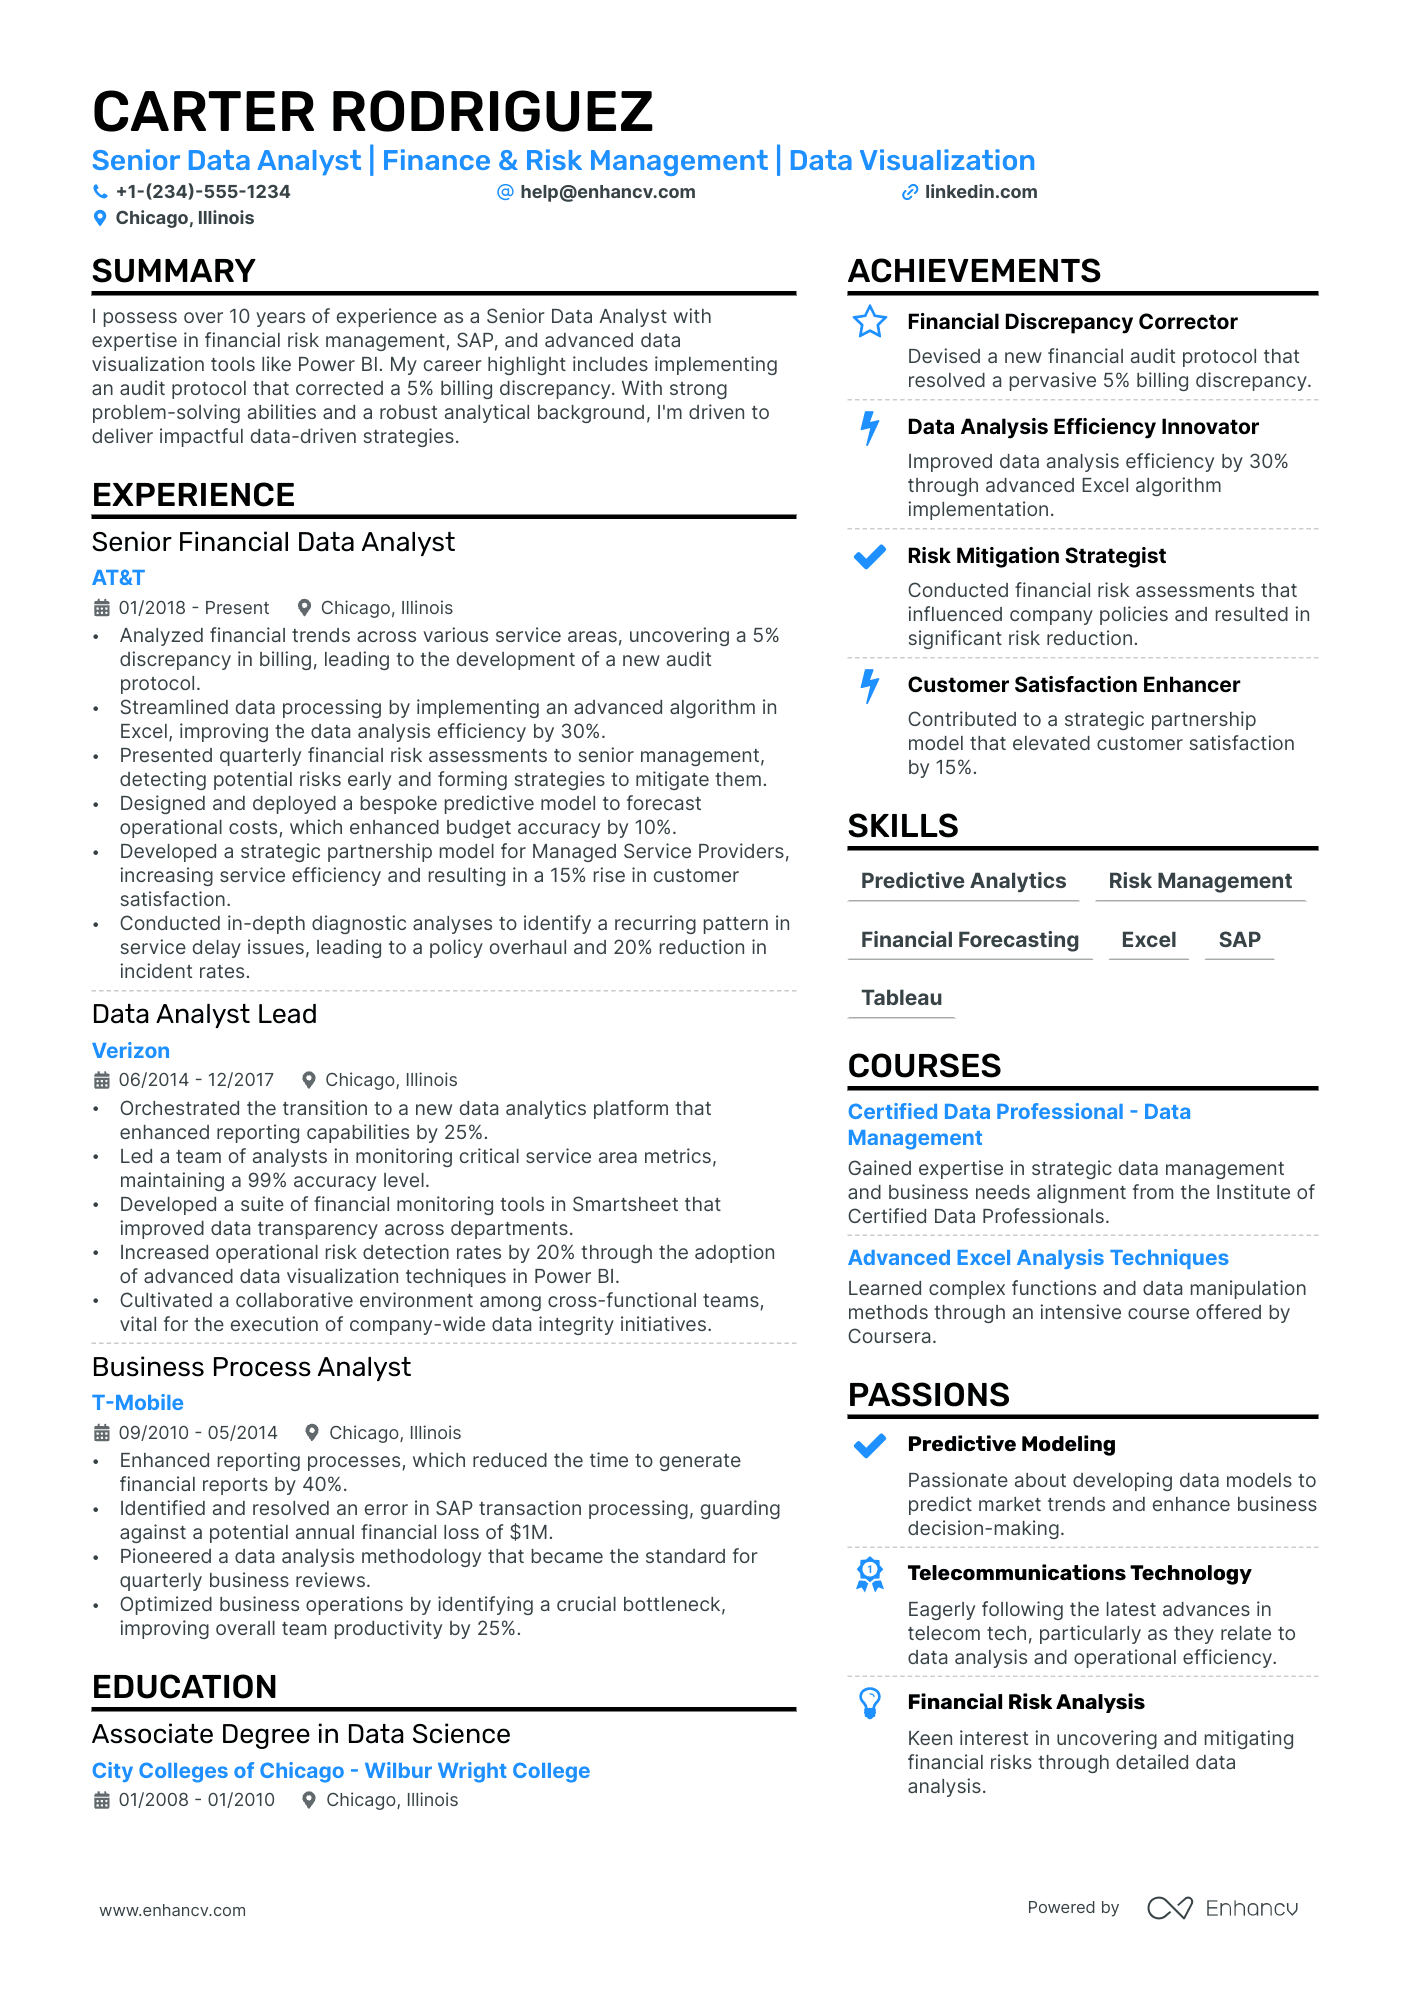 Financial Data Analyst resume example